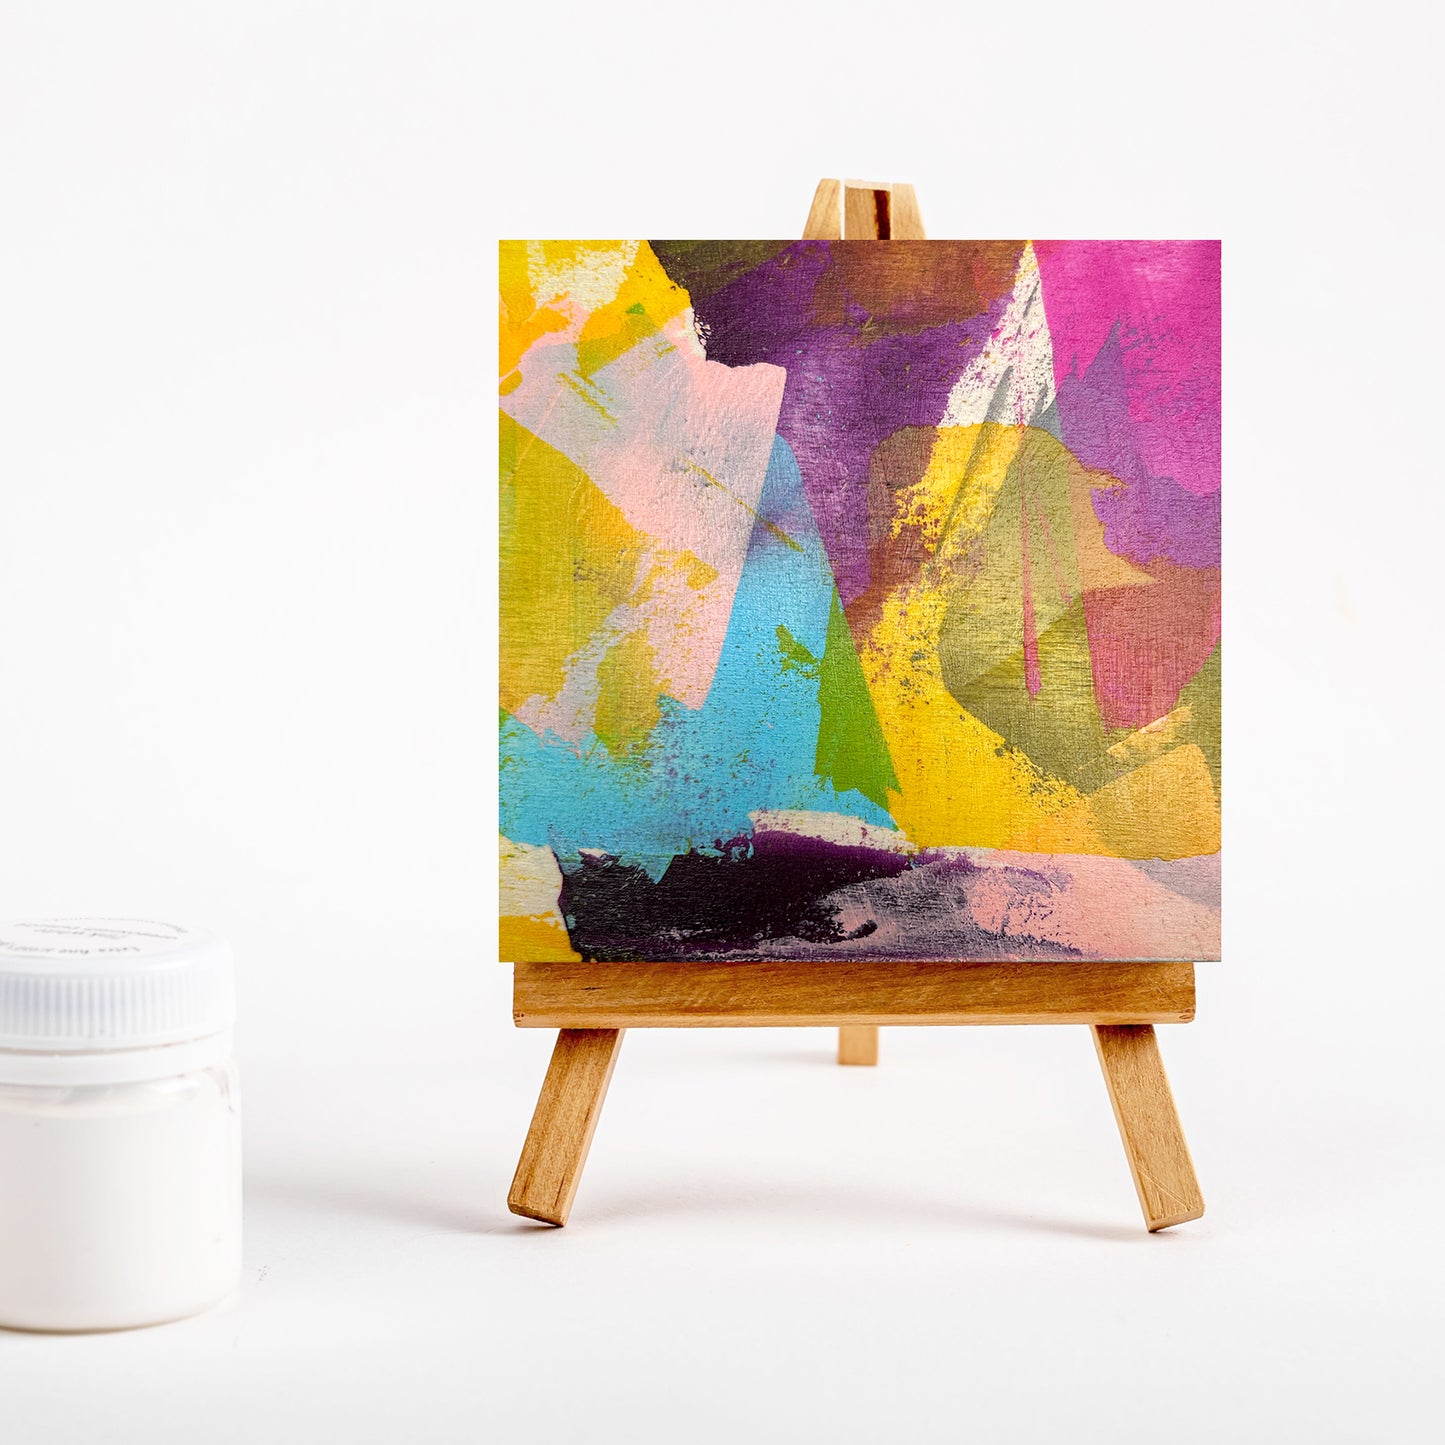 MINI "HOPE SERIES" PAINTING WITH EASEL - #306